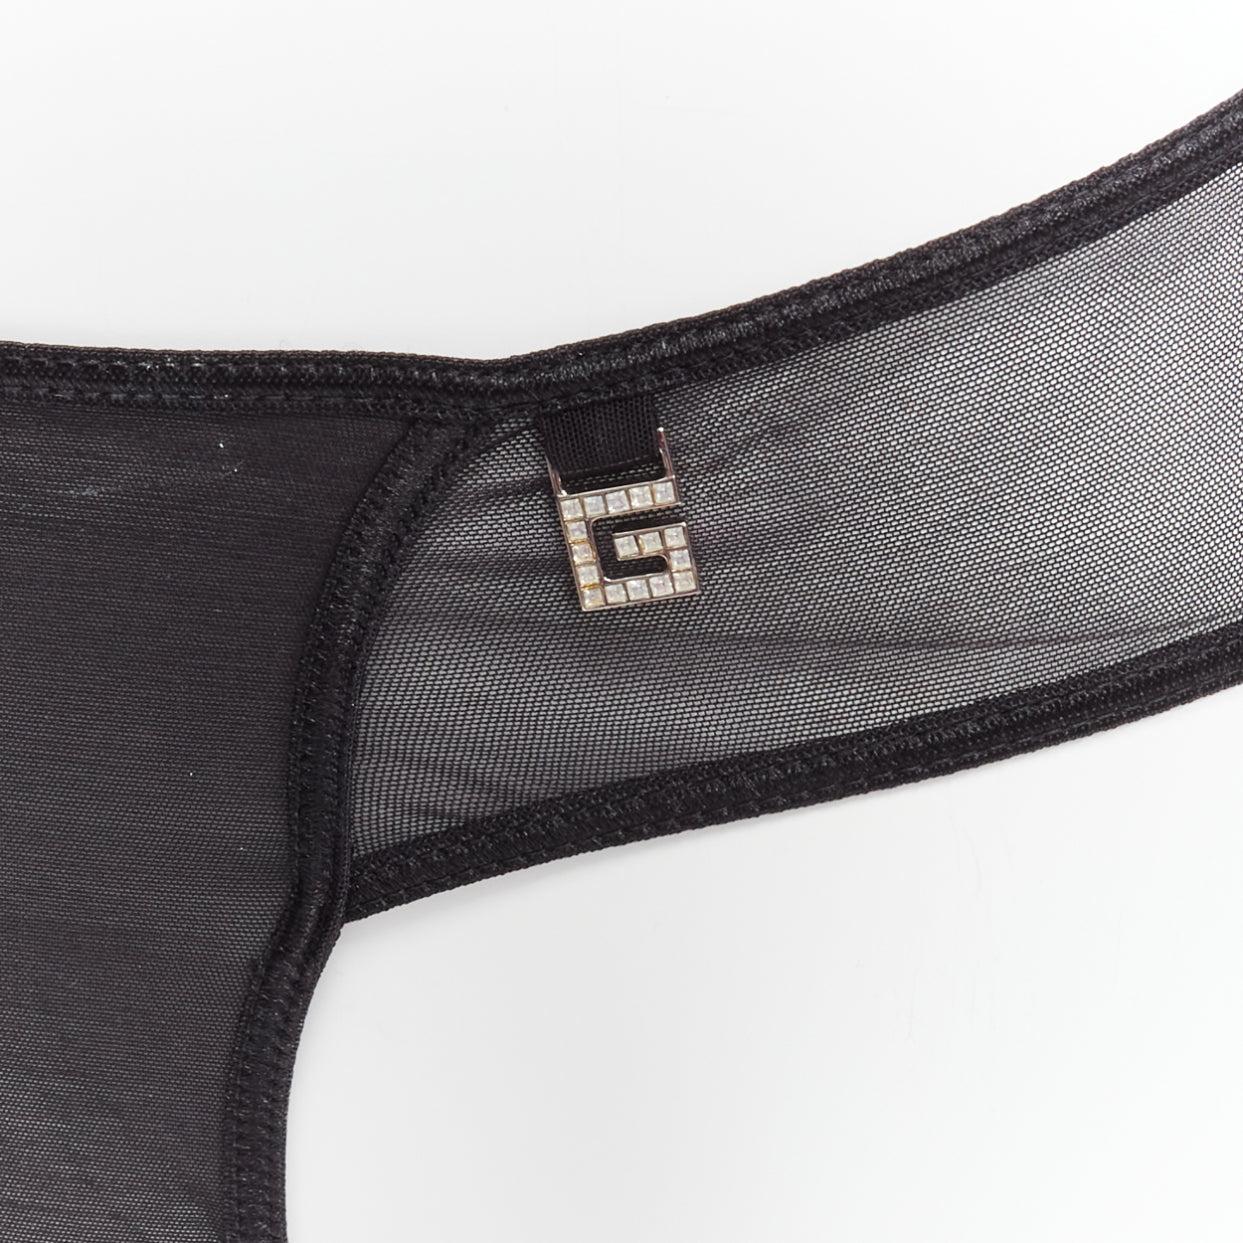 new GUCCI Tom Ford Vintage crystal G logo sheer bottom underwear S
Reference: PYCN/A00083
Brand: Gucci
Designer: Tom Ford
Material: Mesh
Color: Black, Clear
Pattern: Solid
Closure: Elasticated
Made in: Italy

CONDITION:
Condition: New with